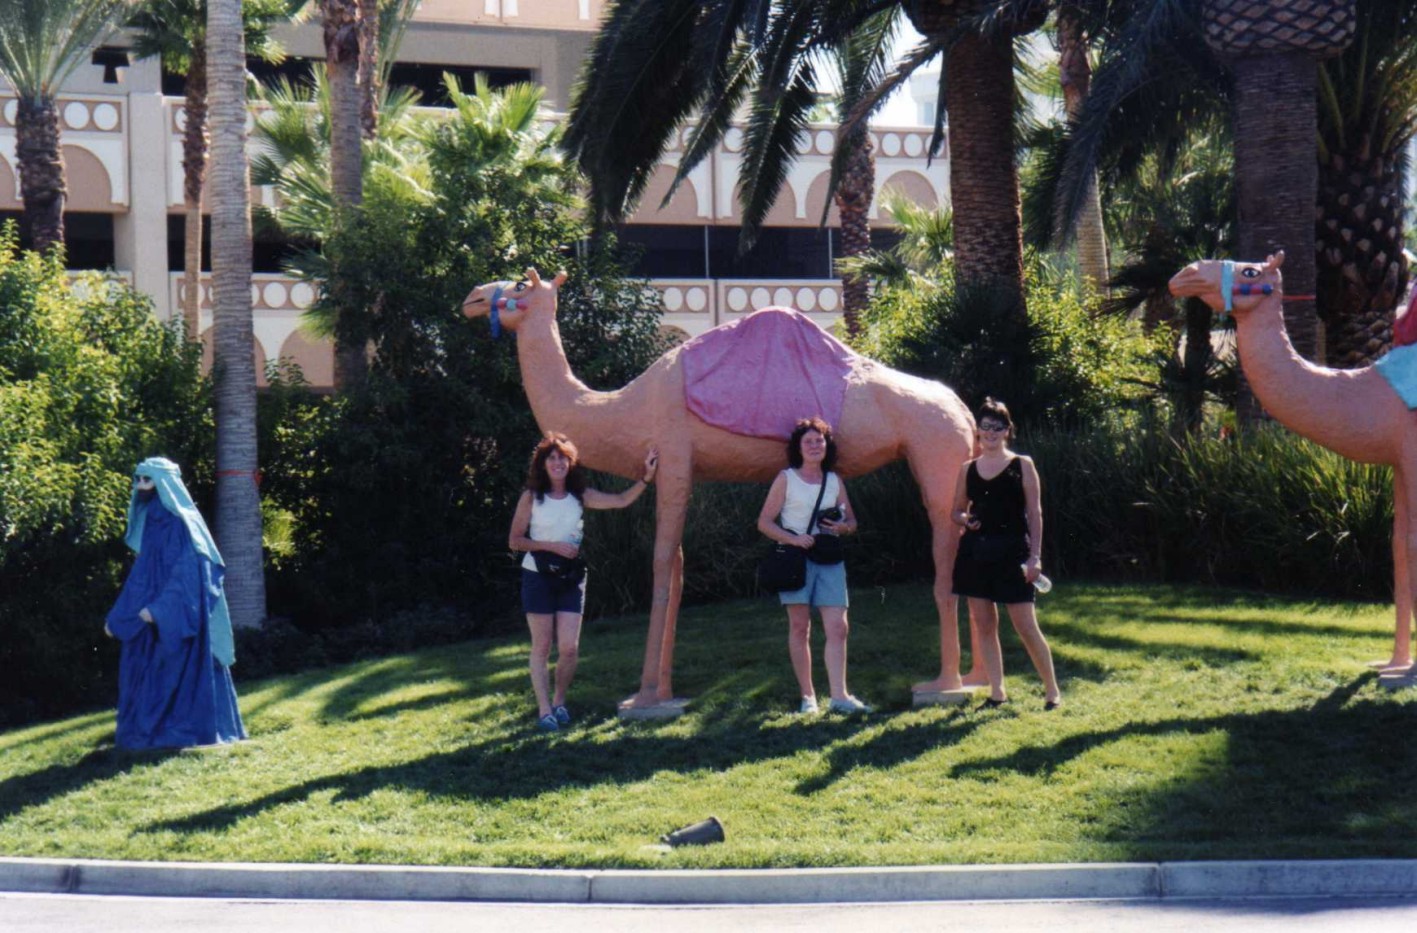 Before the earth moved, Las Vegas 1999